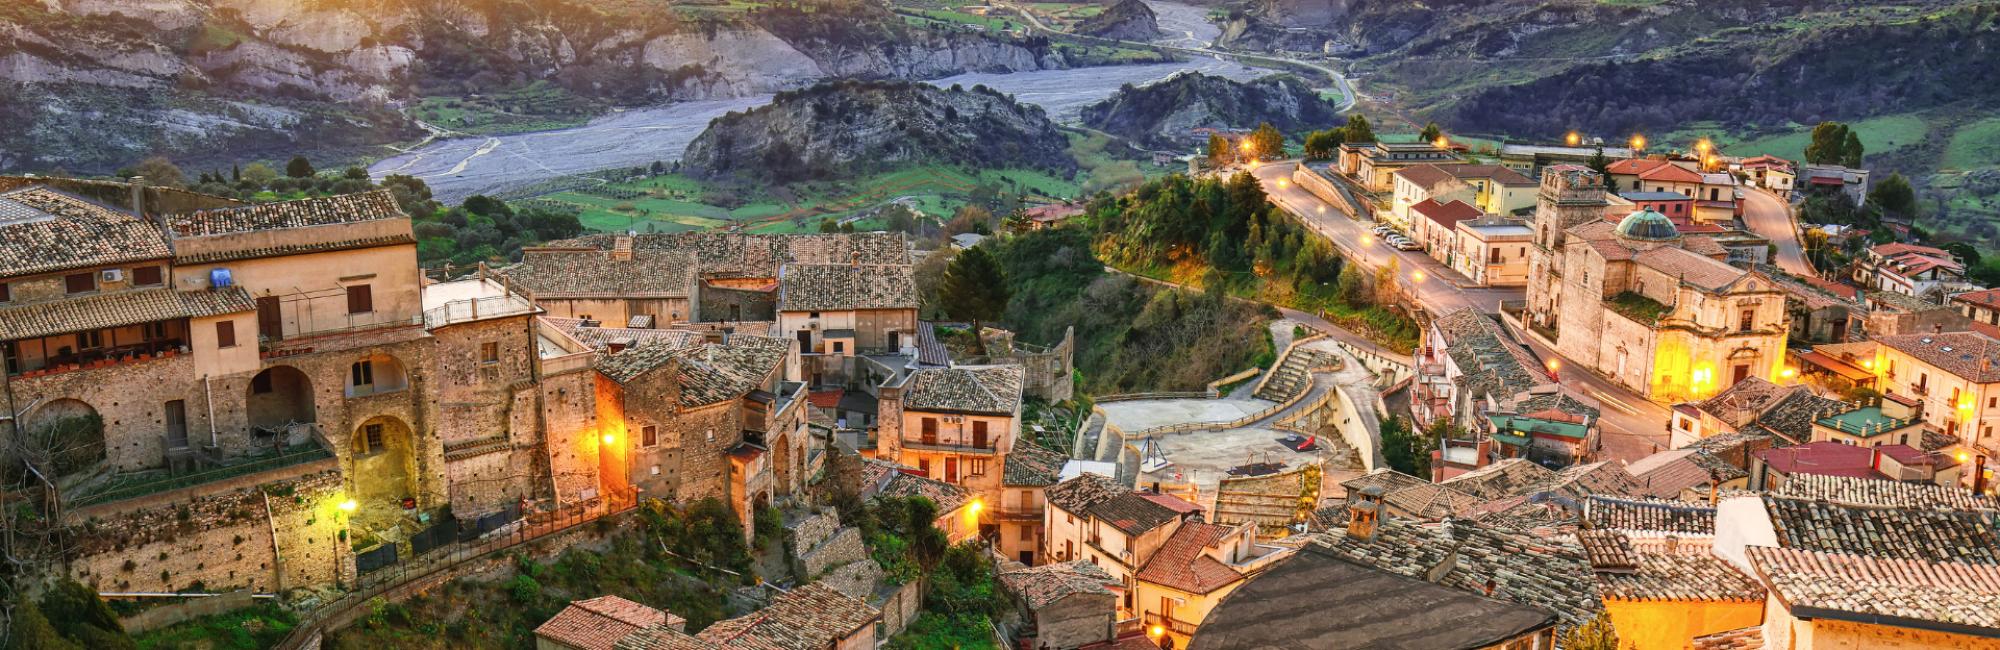 A journey through Sicily - and how beauty will save the world